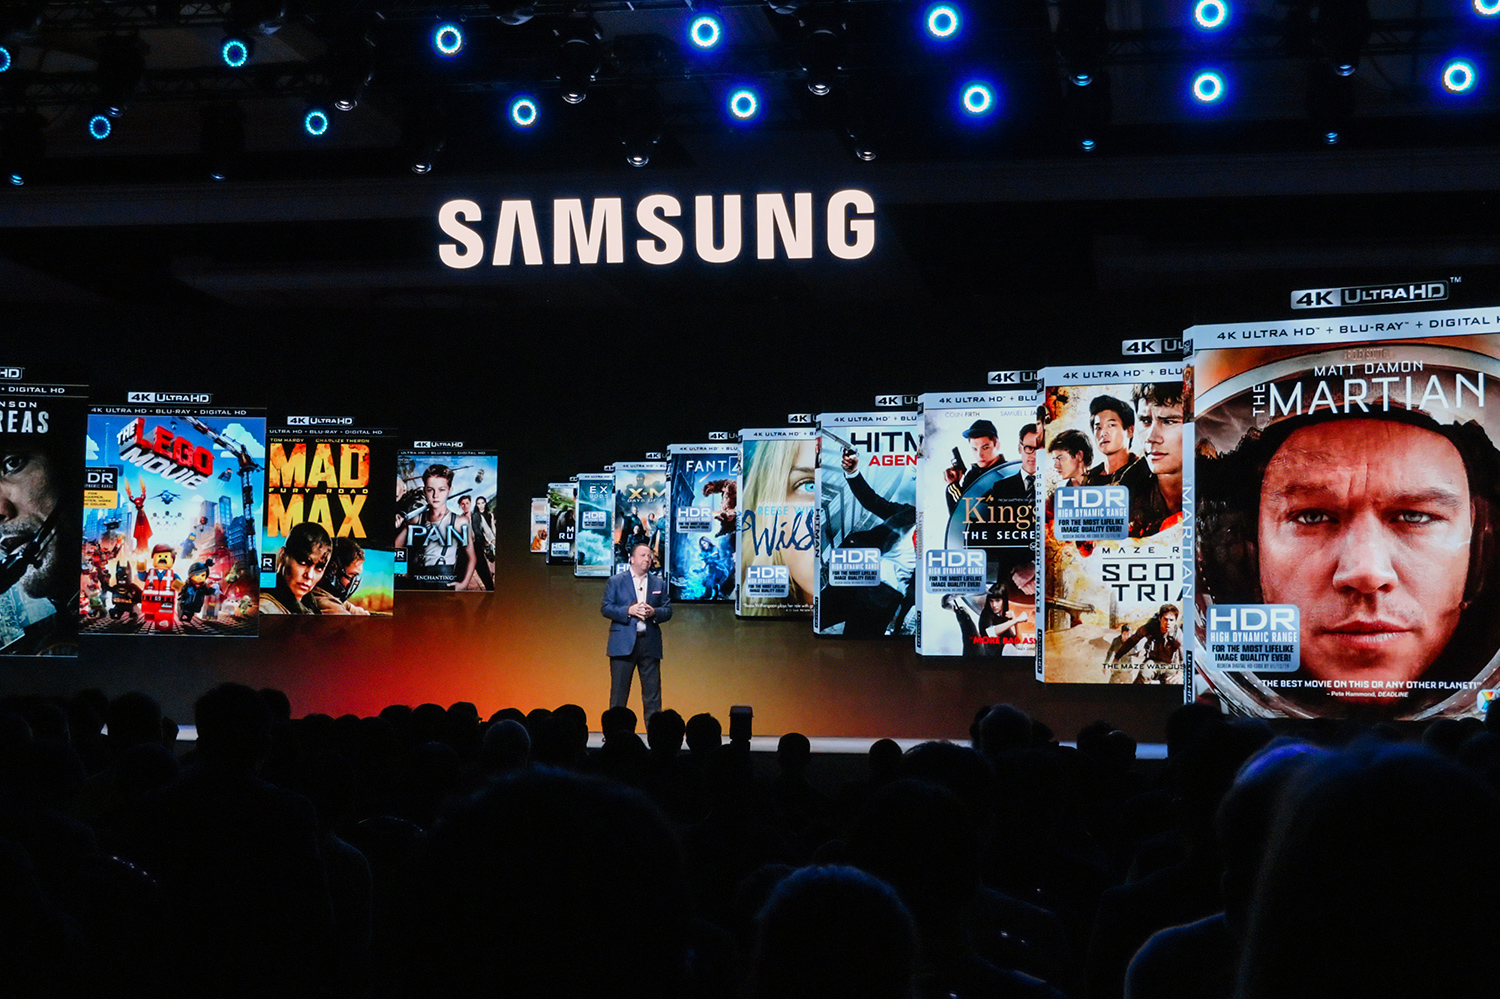  Samsung will stop releasing new Blu-ray players in the U.S